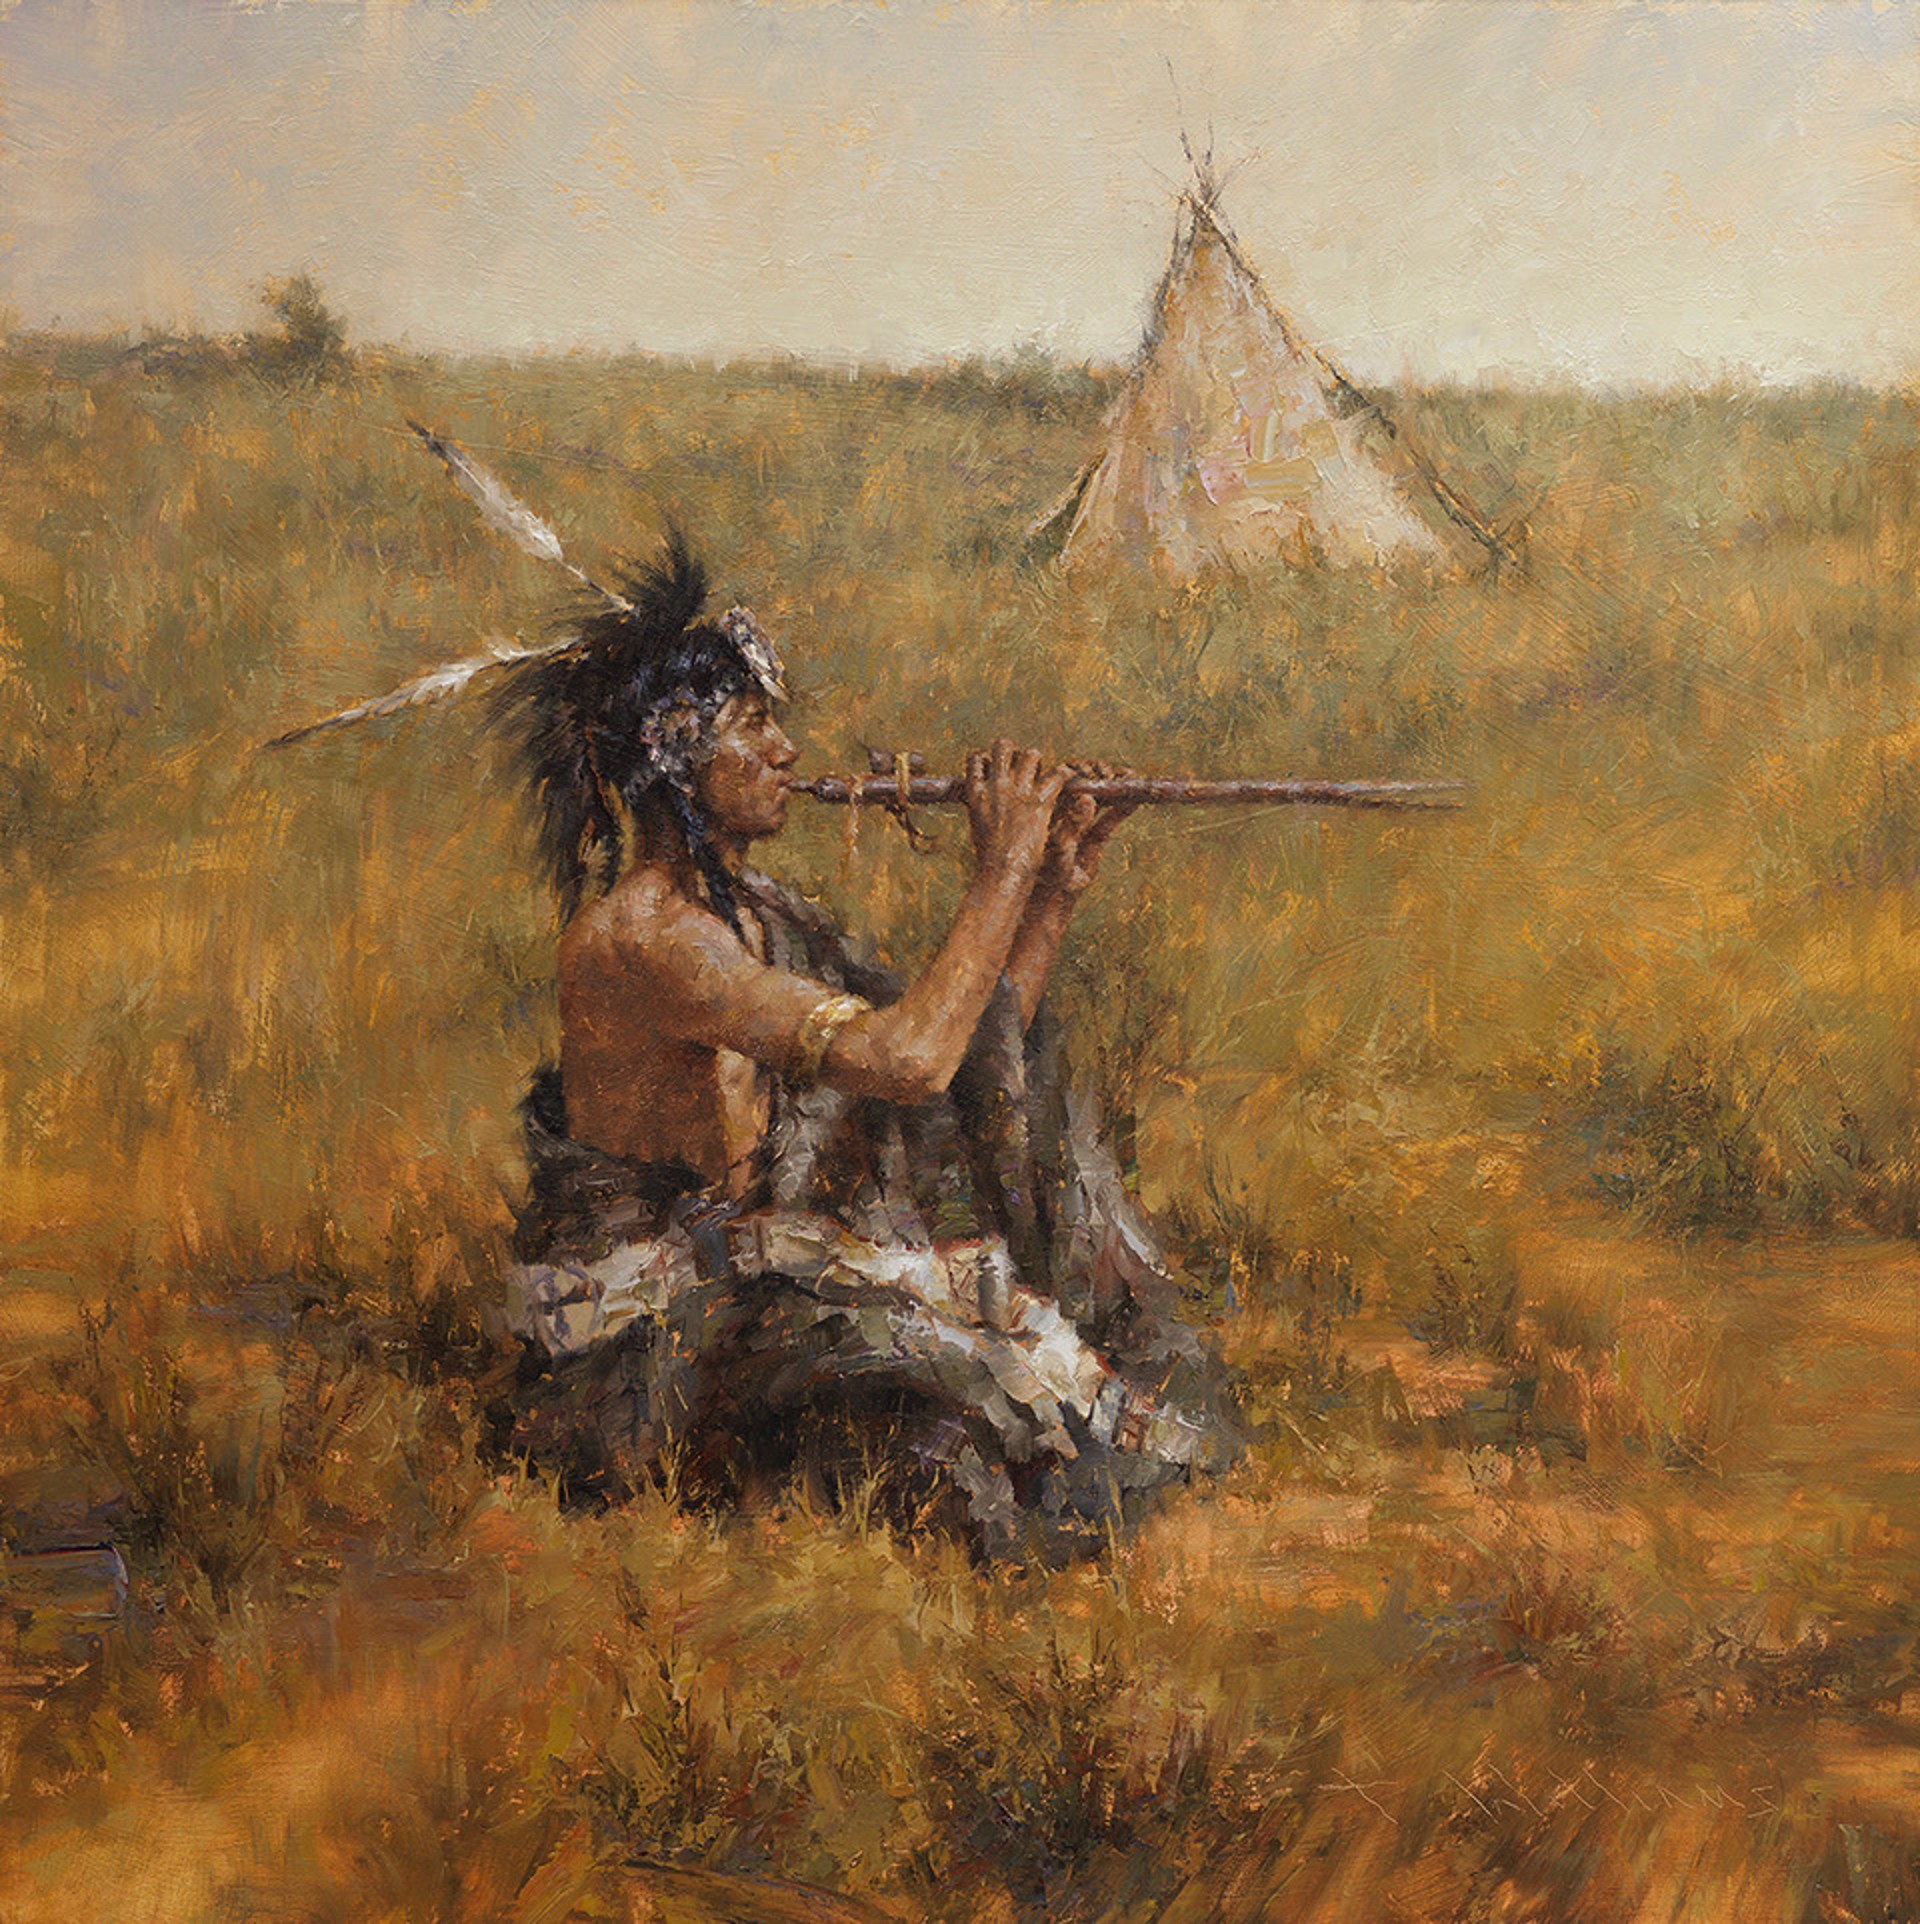 Courting Flute by Todd A. Williams